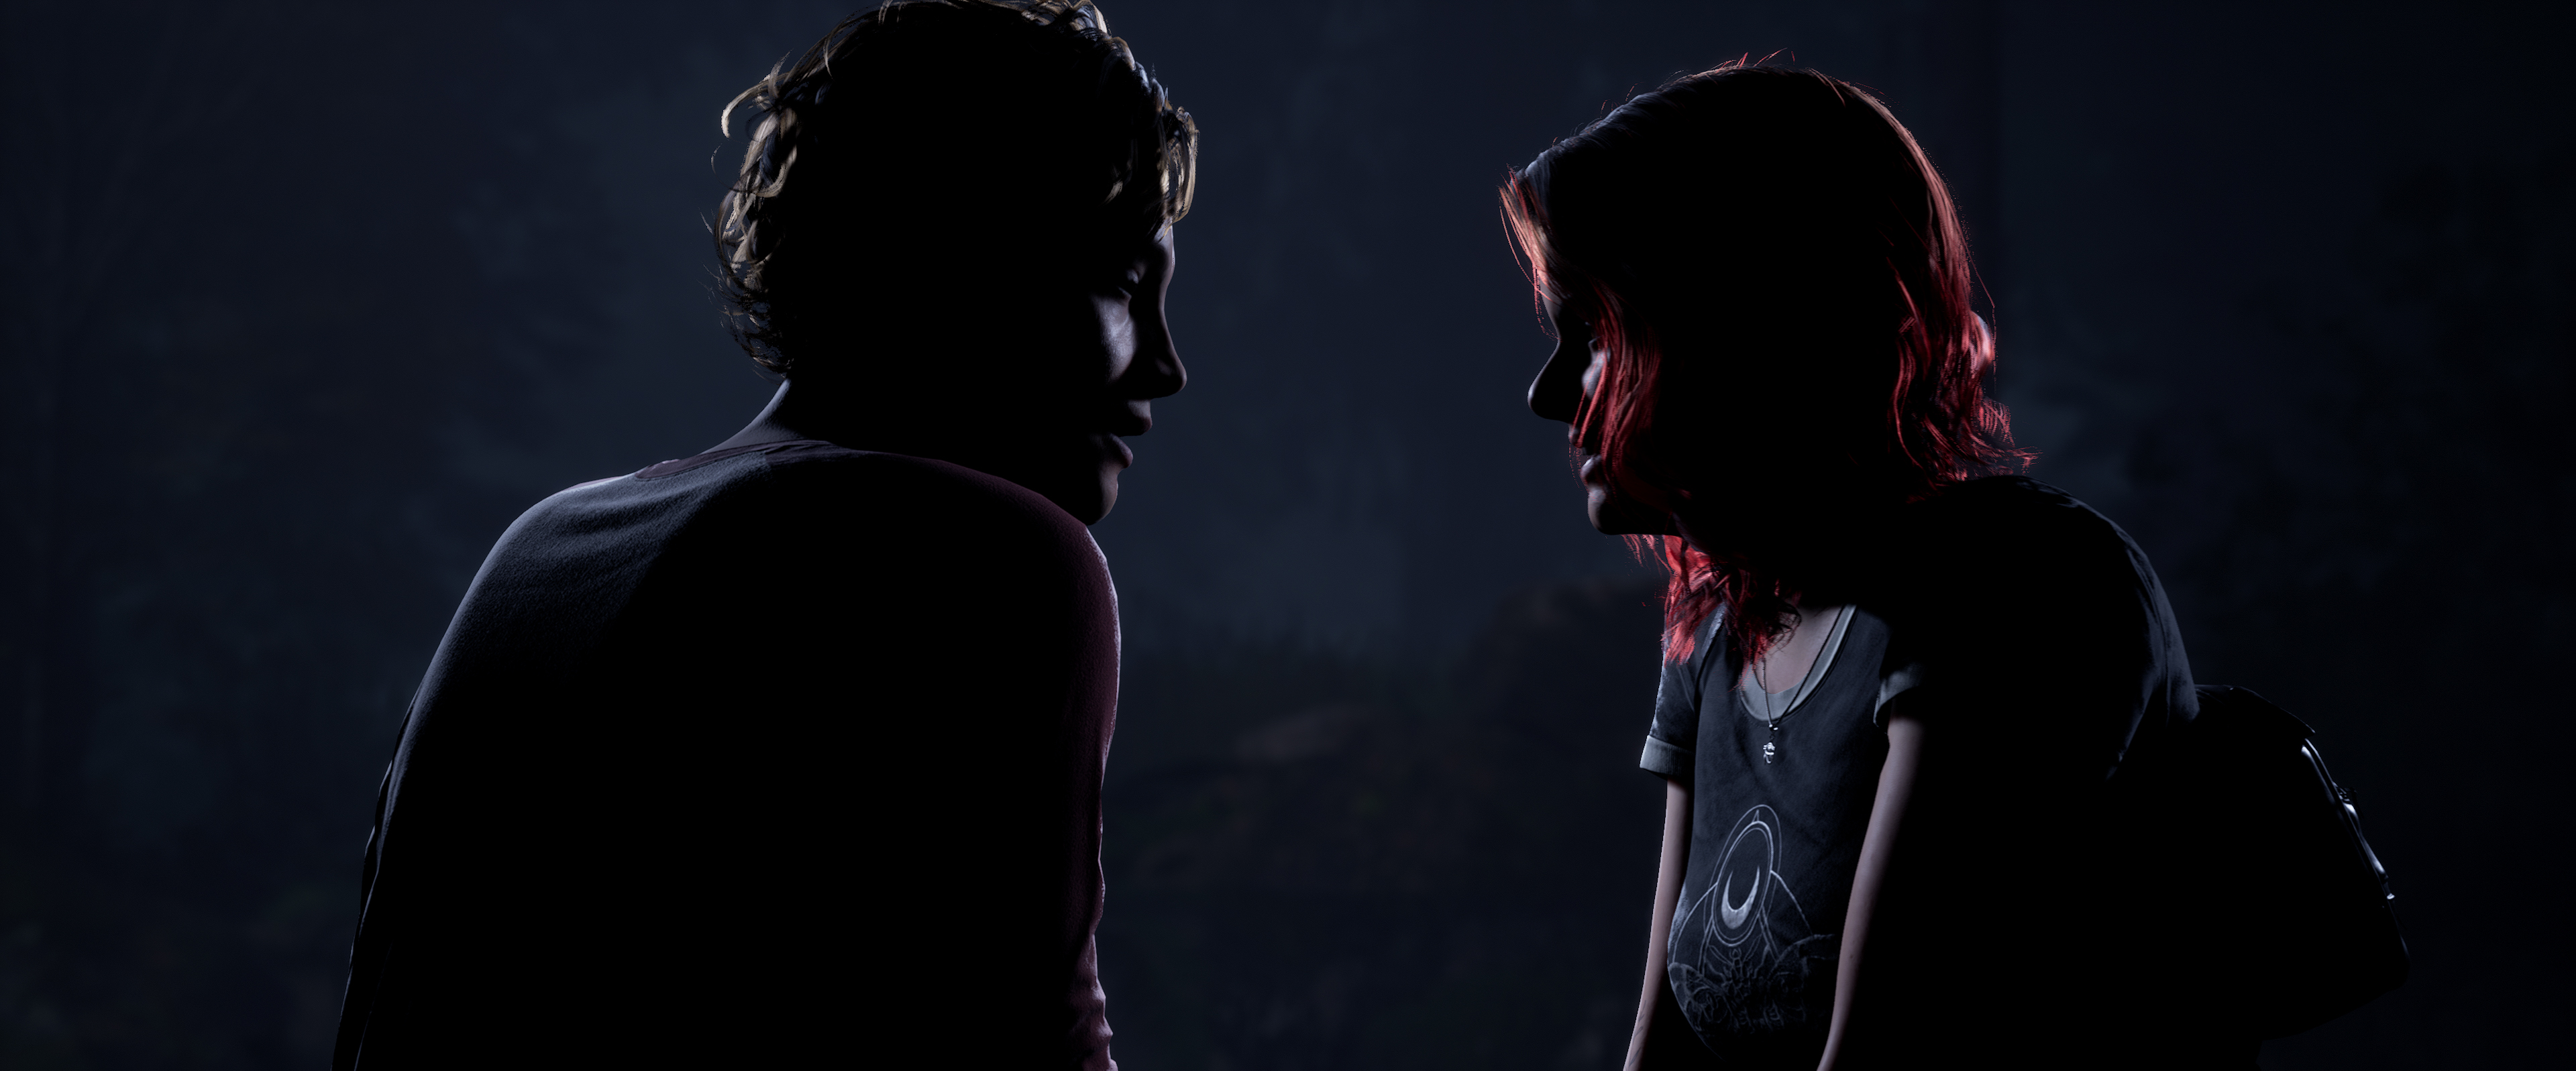 Two campers prepare to kiss in a screenshot from horror game The Quarry